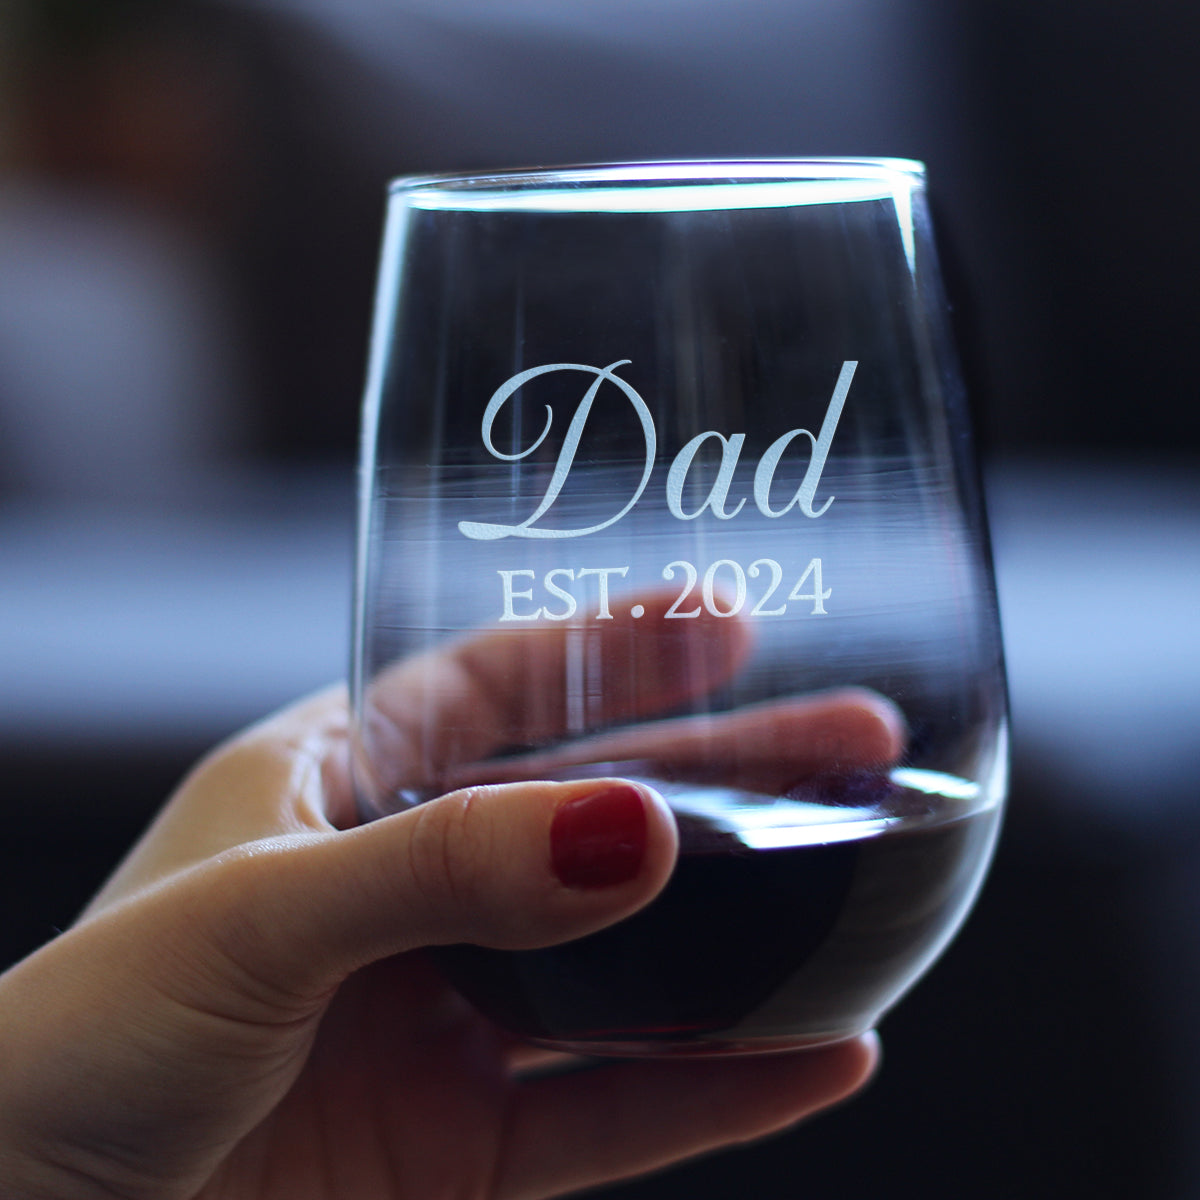 Dad Est 2024 - New Father Stemless Wine Glass Gift for First Time Parents - Decorative 17 Oz Large Glasses